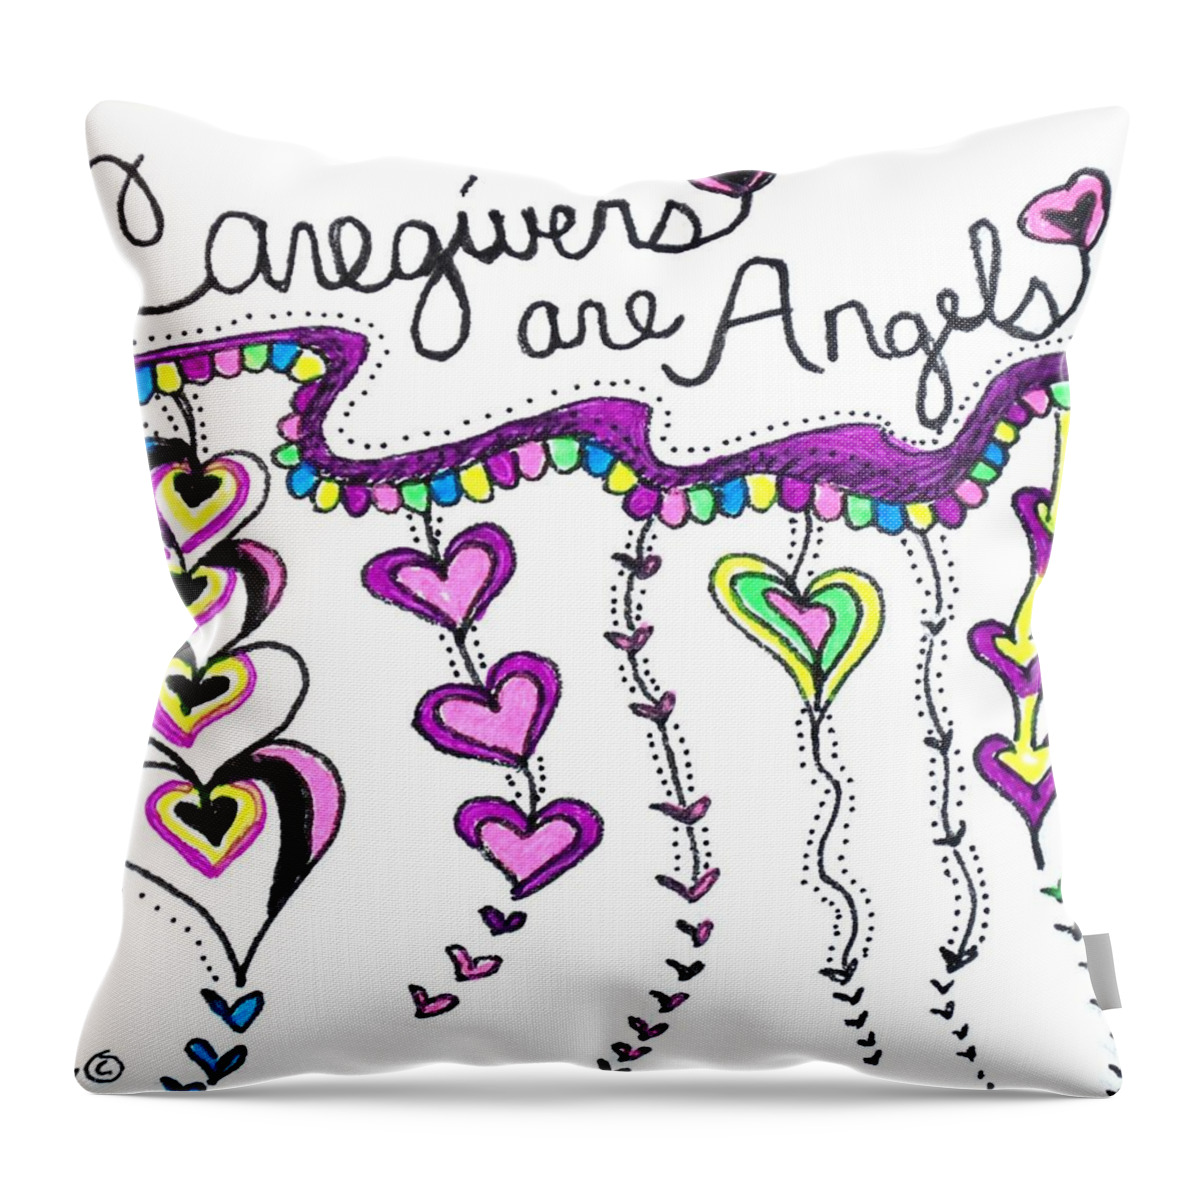 Caregiver Throw Pillow featuring the drawing Caregiver Chime by Carole Brecht